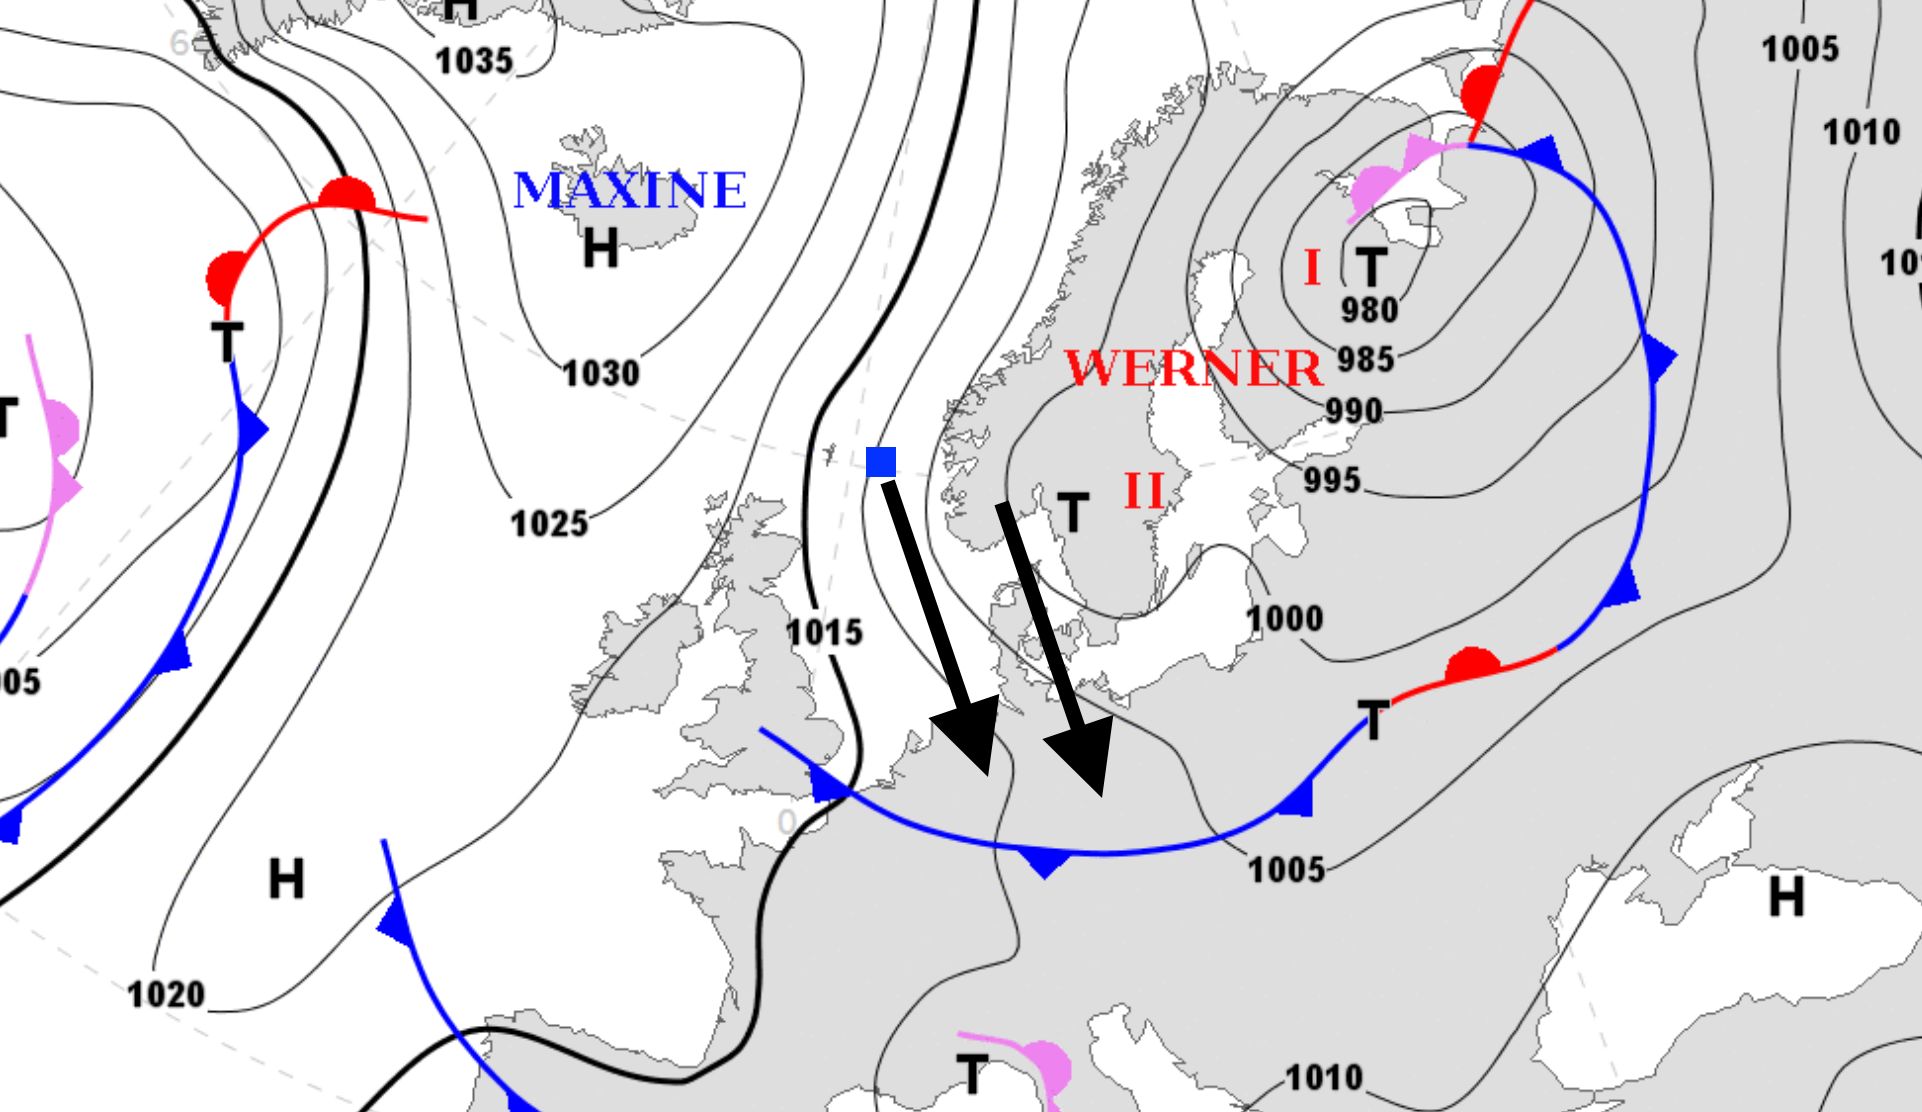 Polar air on its way to the Alps